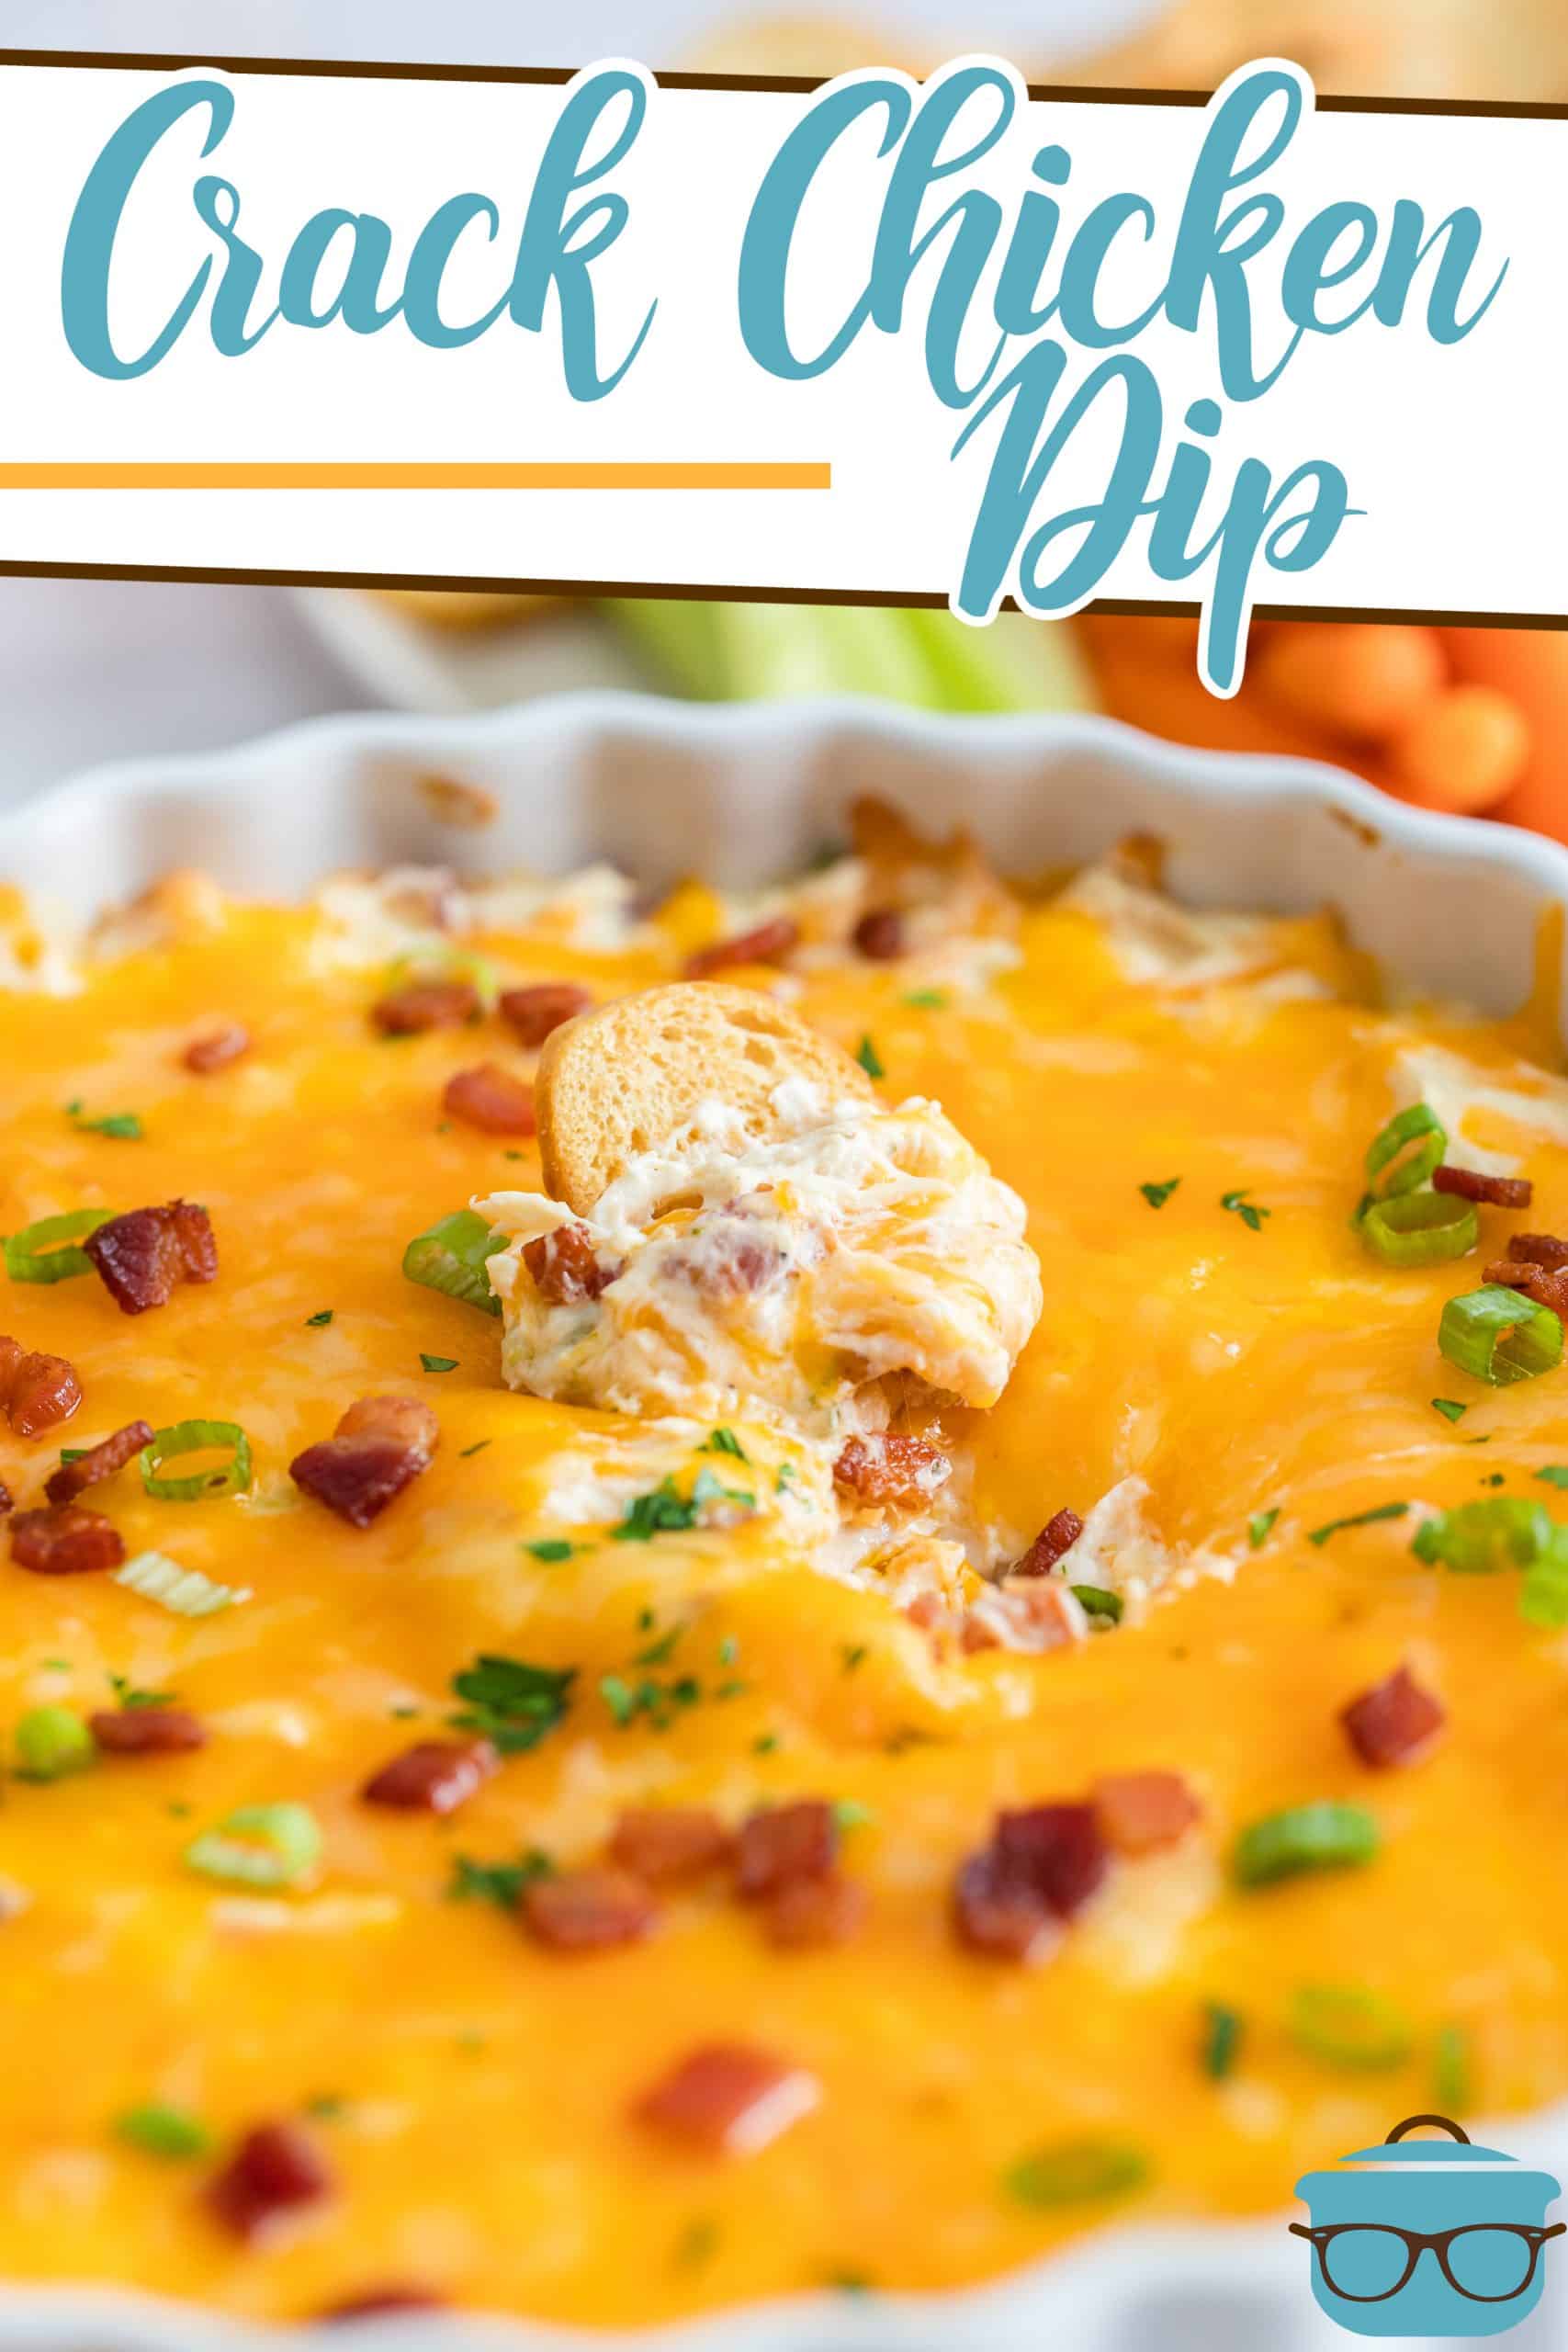 The Best Crack Chicken Dip recipe from The Country Cook, shown fully cooked in a white baking dish with a chip dipped in the center.